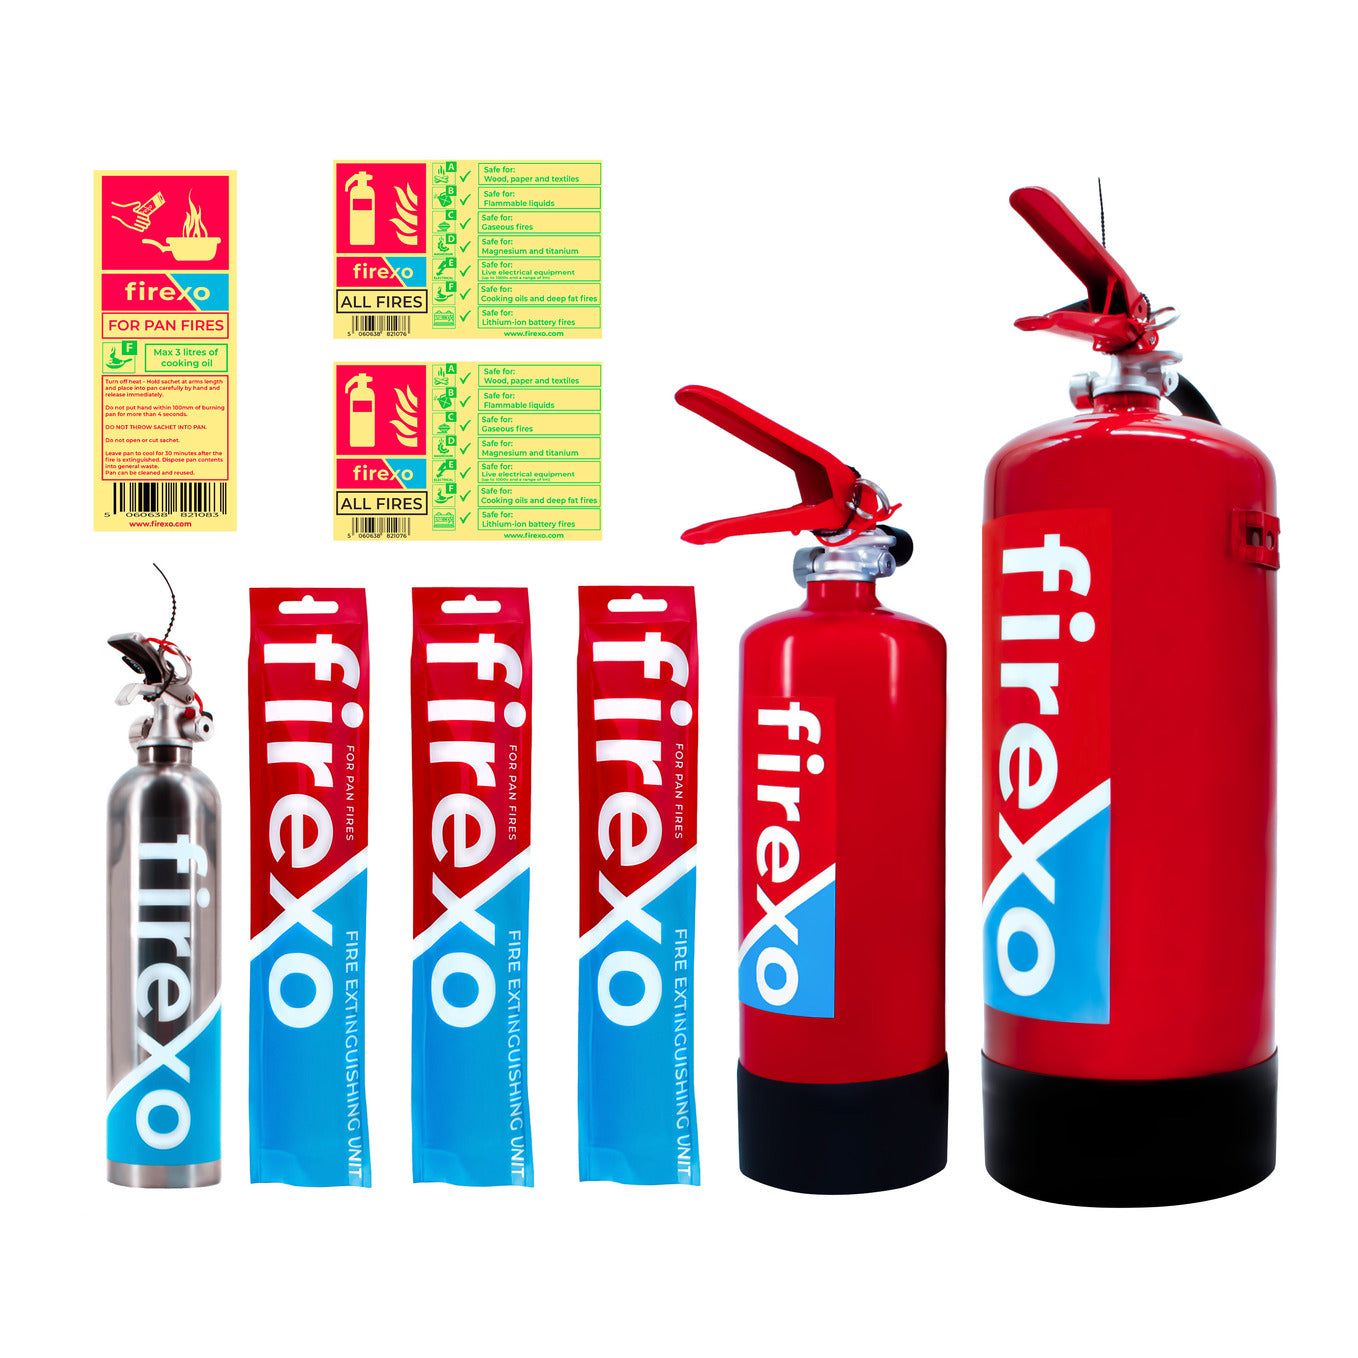 Firexo Landlord HMO ALL FIRES Fire Extinguisher Set